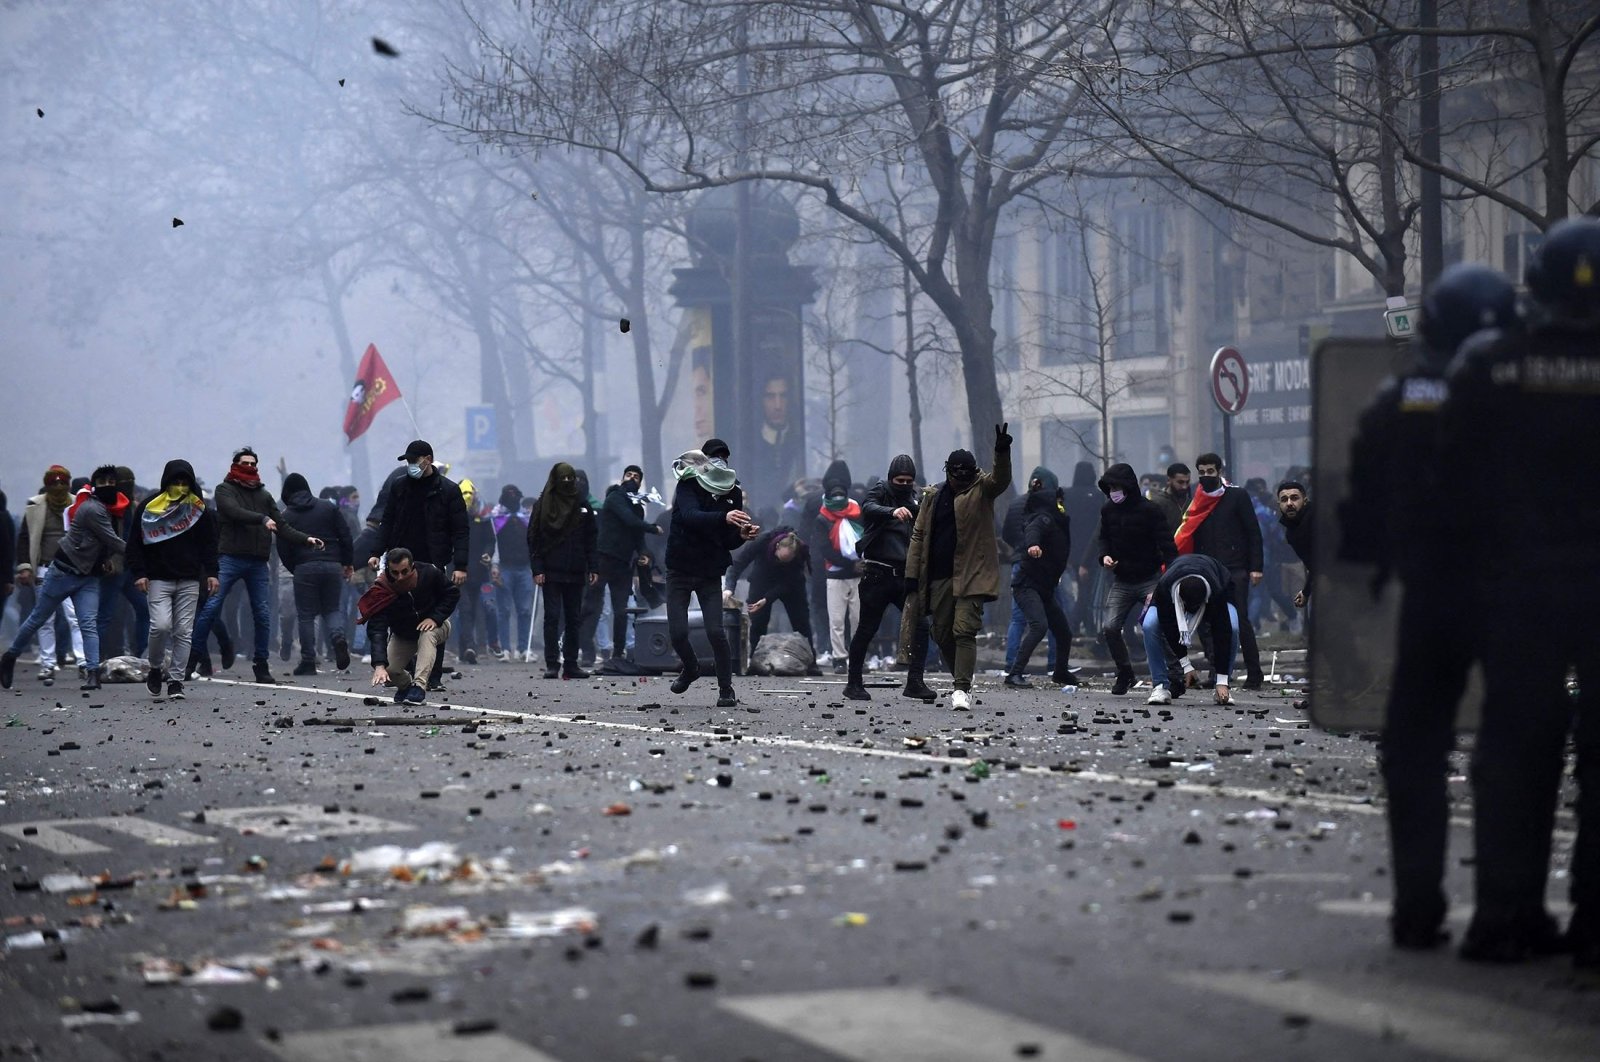 PKK terror group supporters face riot police as clashes erupt, in Paris, France, Dec. 24, 2022. (AFP Photo)